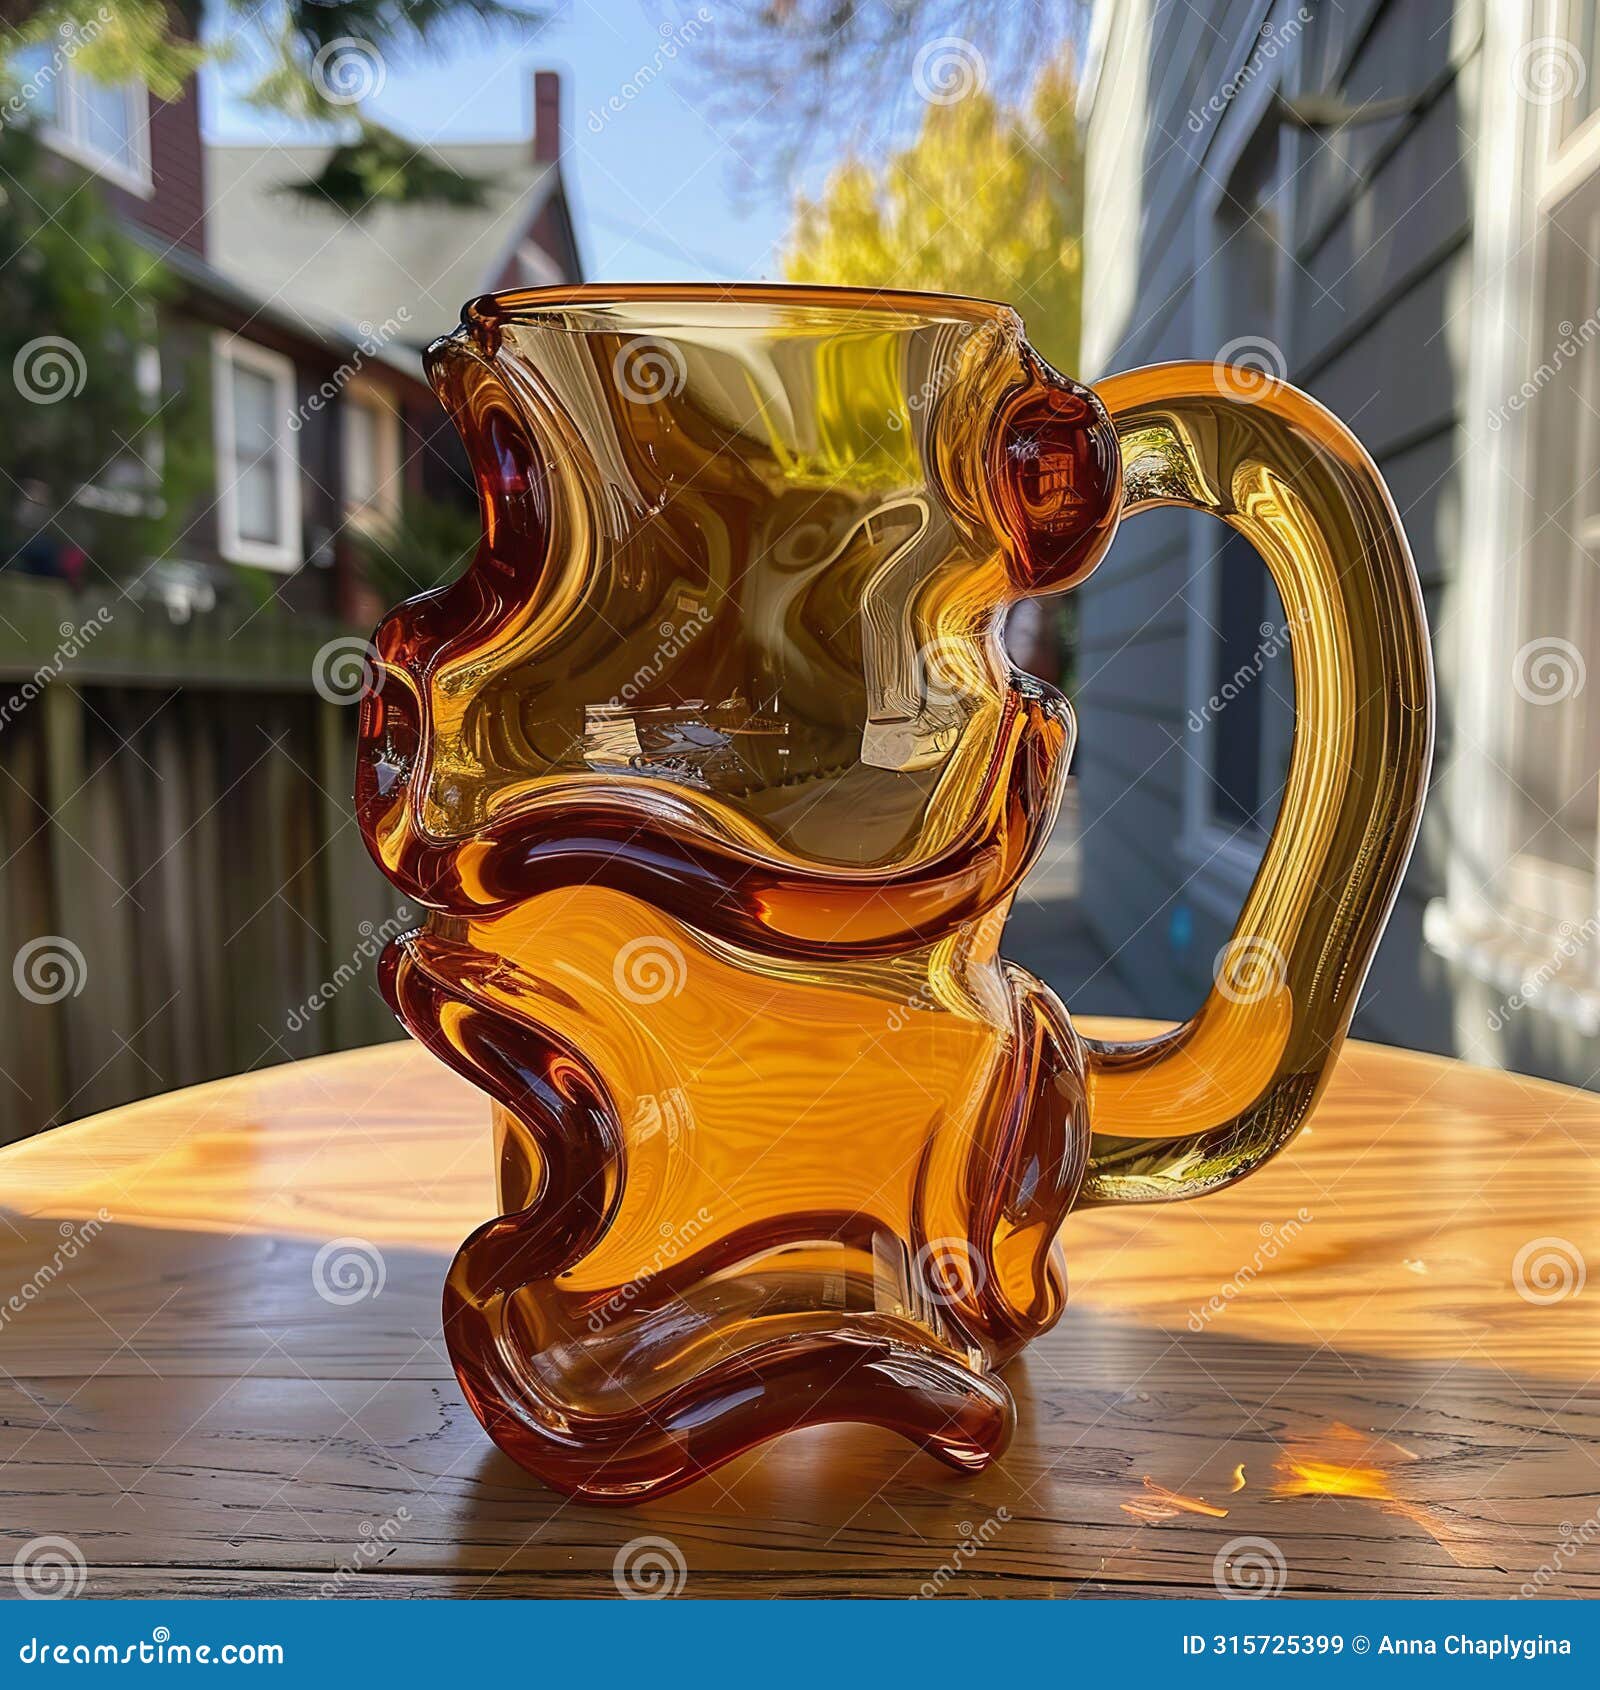 artistic amber glass mug on wooden table, unique squiggly 